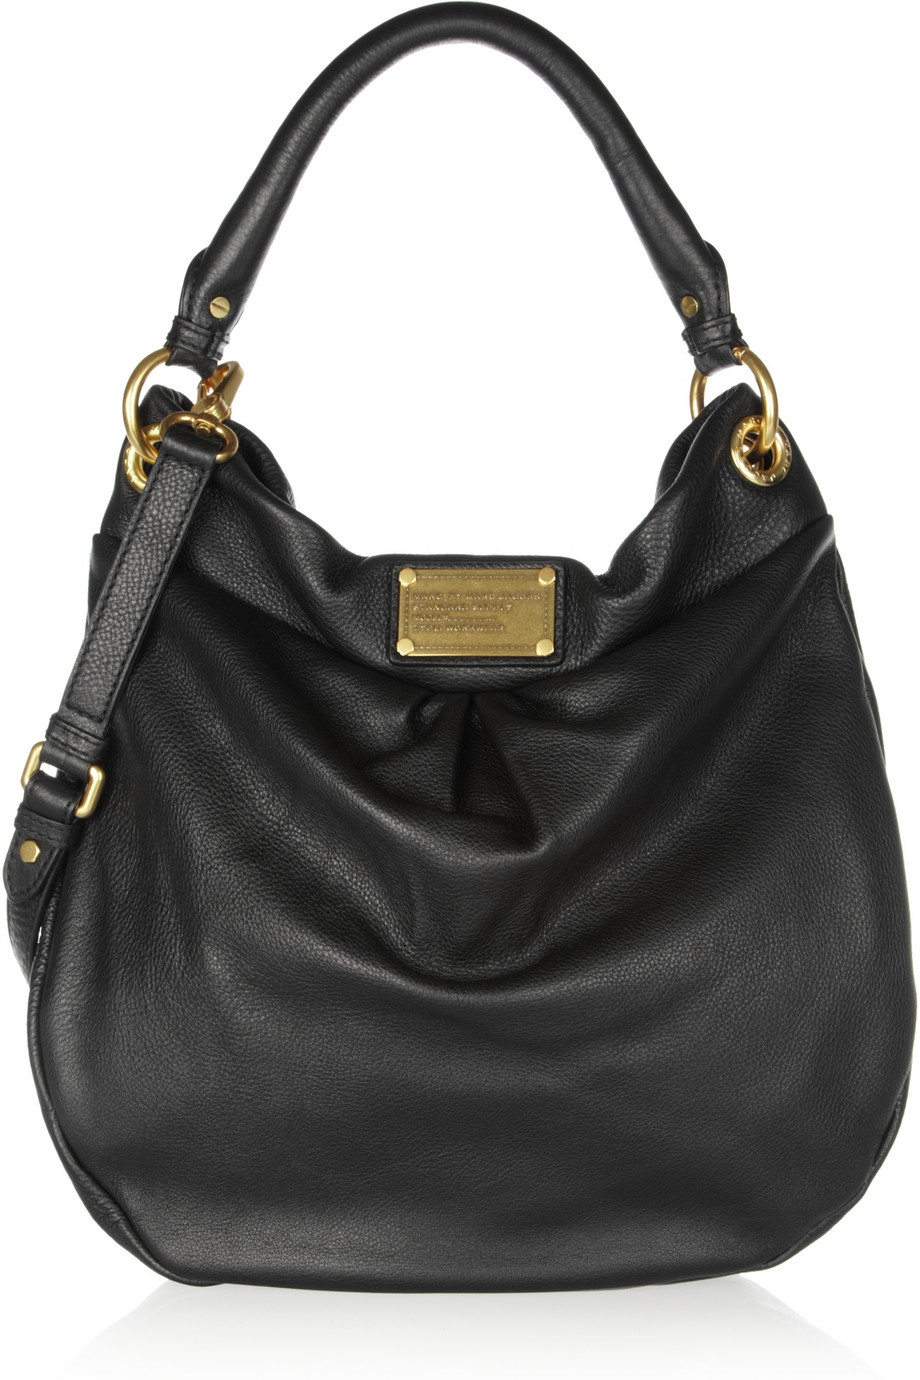 Marc By Marc Jacobs The Classic Q Hillier Hobo Textured-Leather Shoulder Bag in Black | Lyst